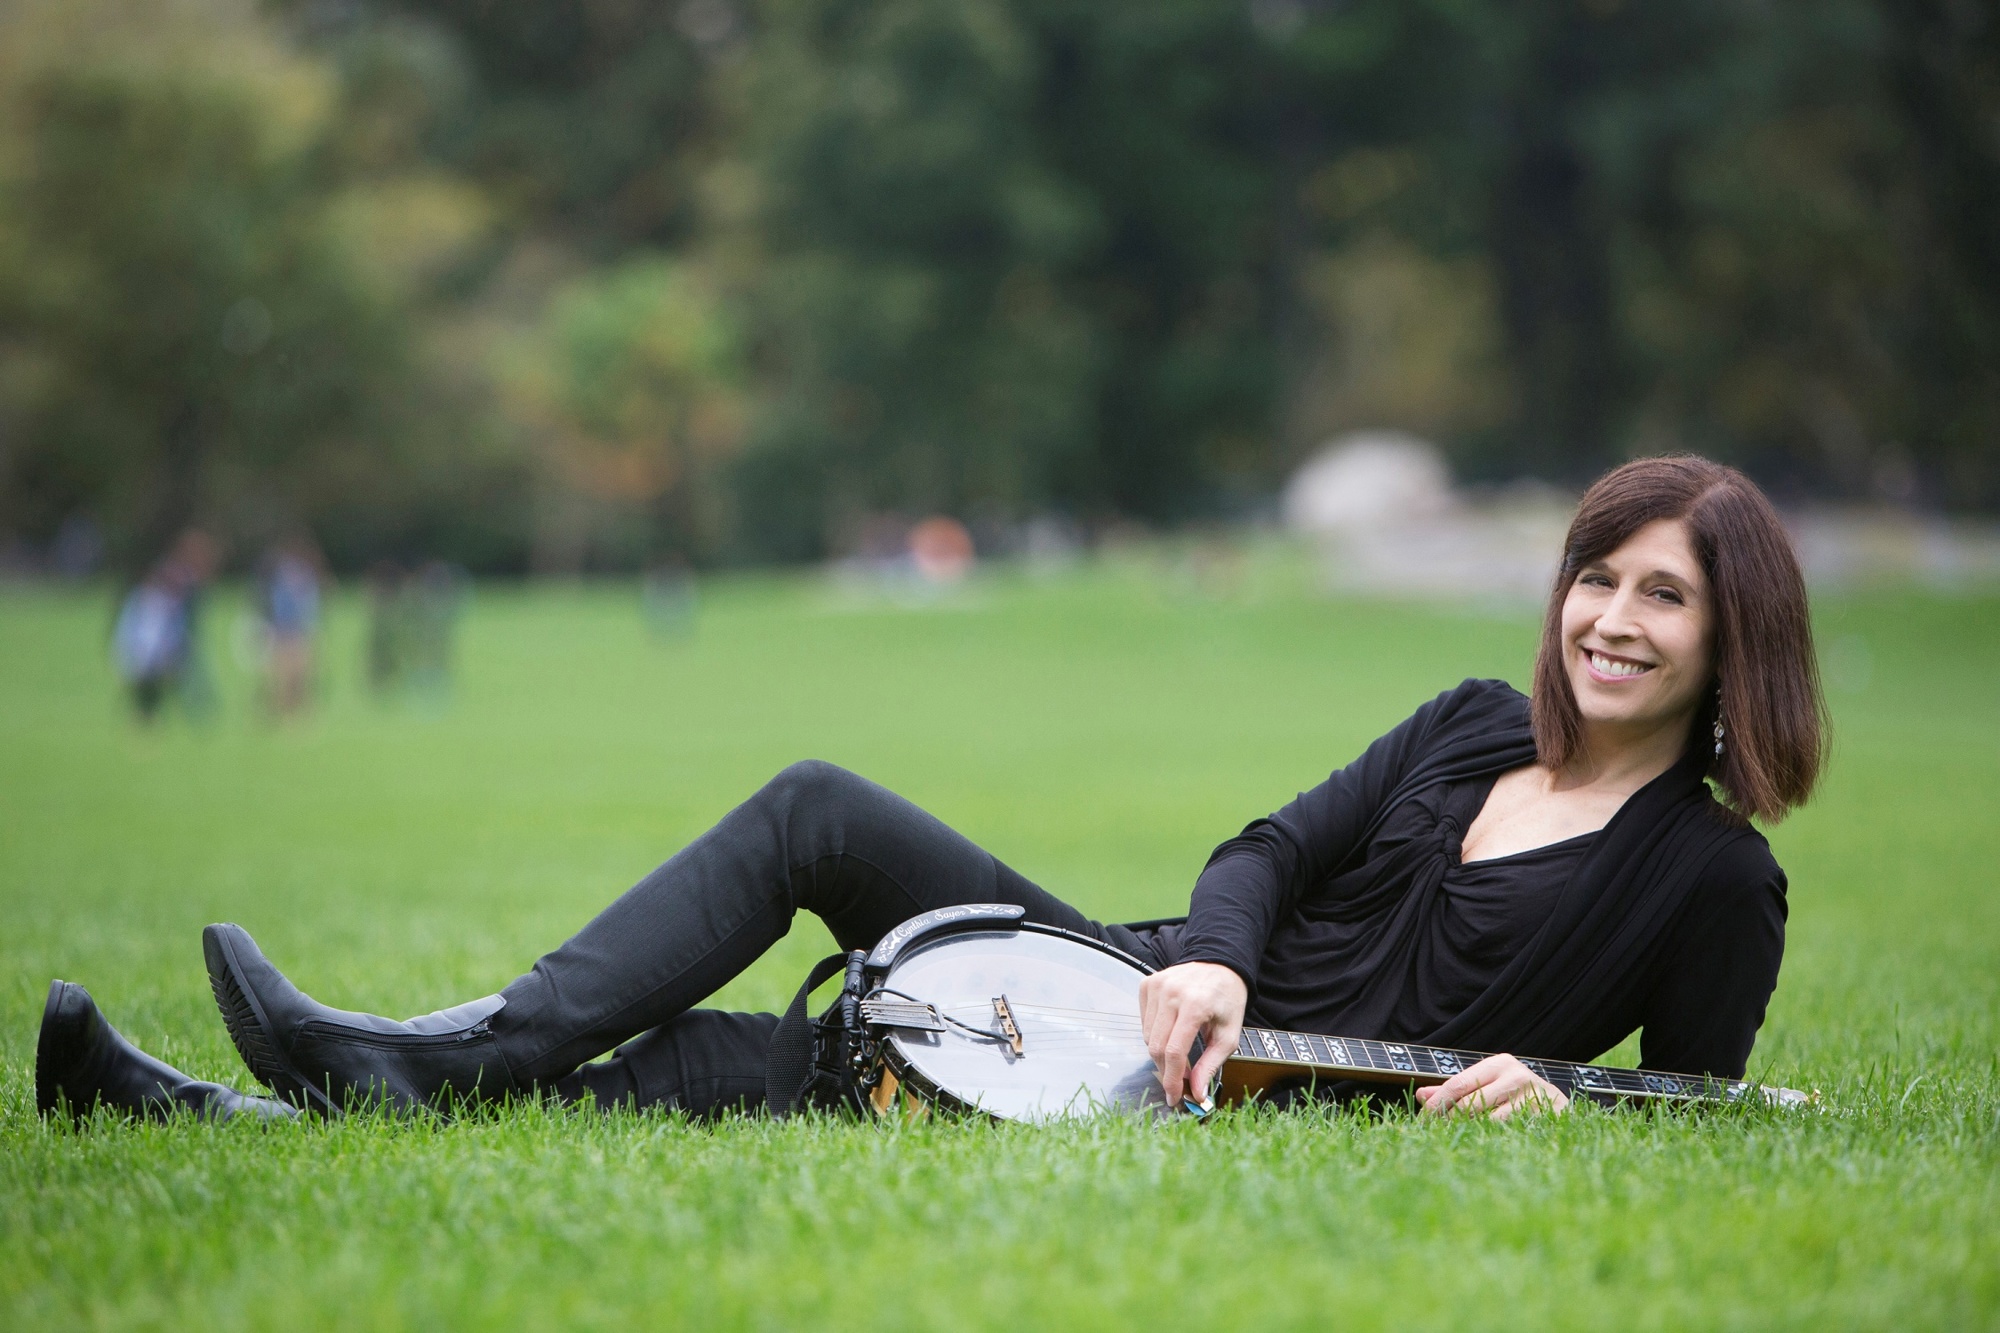 Banjoist Cynthia Sayer is a 2006 inductee into the National Four-String Banjo Hall of Fame. Courtesy photo